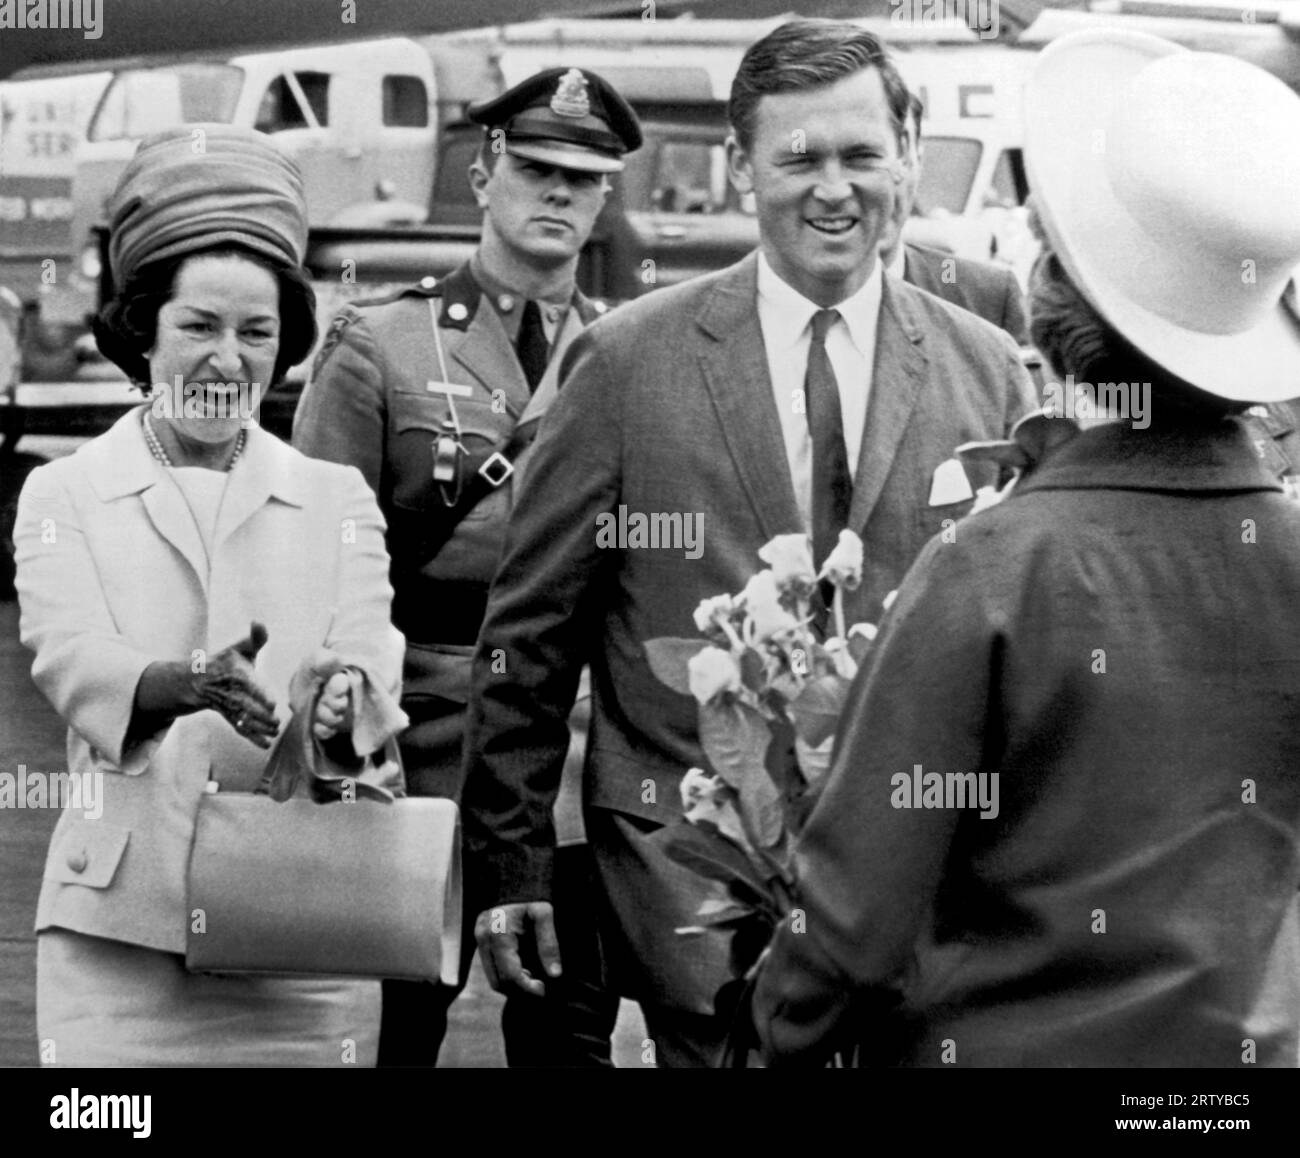 Boston, Massachusetts  June 9, 1964. Mrs. Lyndon B. Johnson greets Mrs. Endicott Peabody, wife of the governor of Massachusetts. The First Lady arrived in Boston today to speak at the Radcliffe Commencement, and is escorted by Governor Peabody. Stock Photo